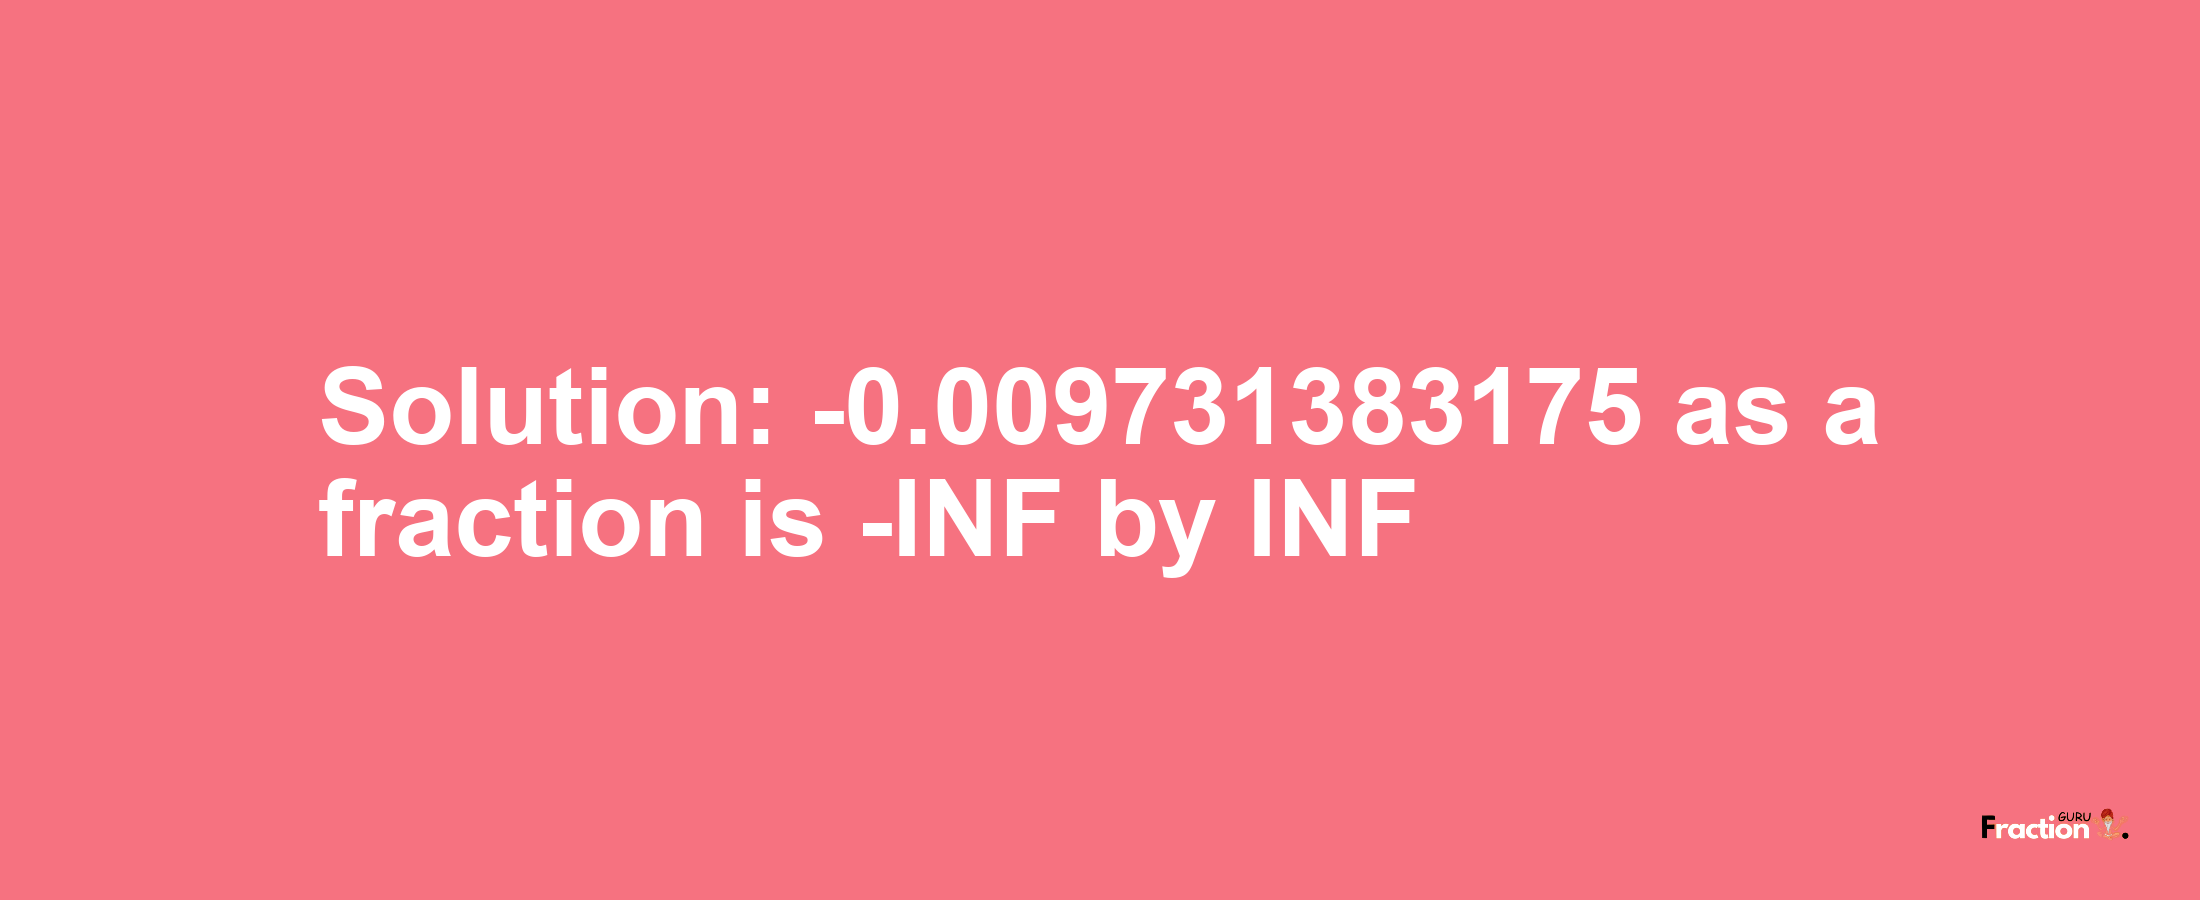 Solution:-0.009731383175 as a fraction is -INF/INF